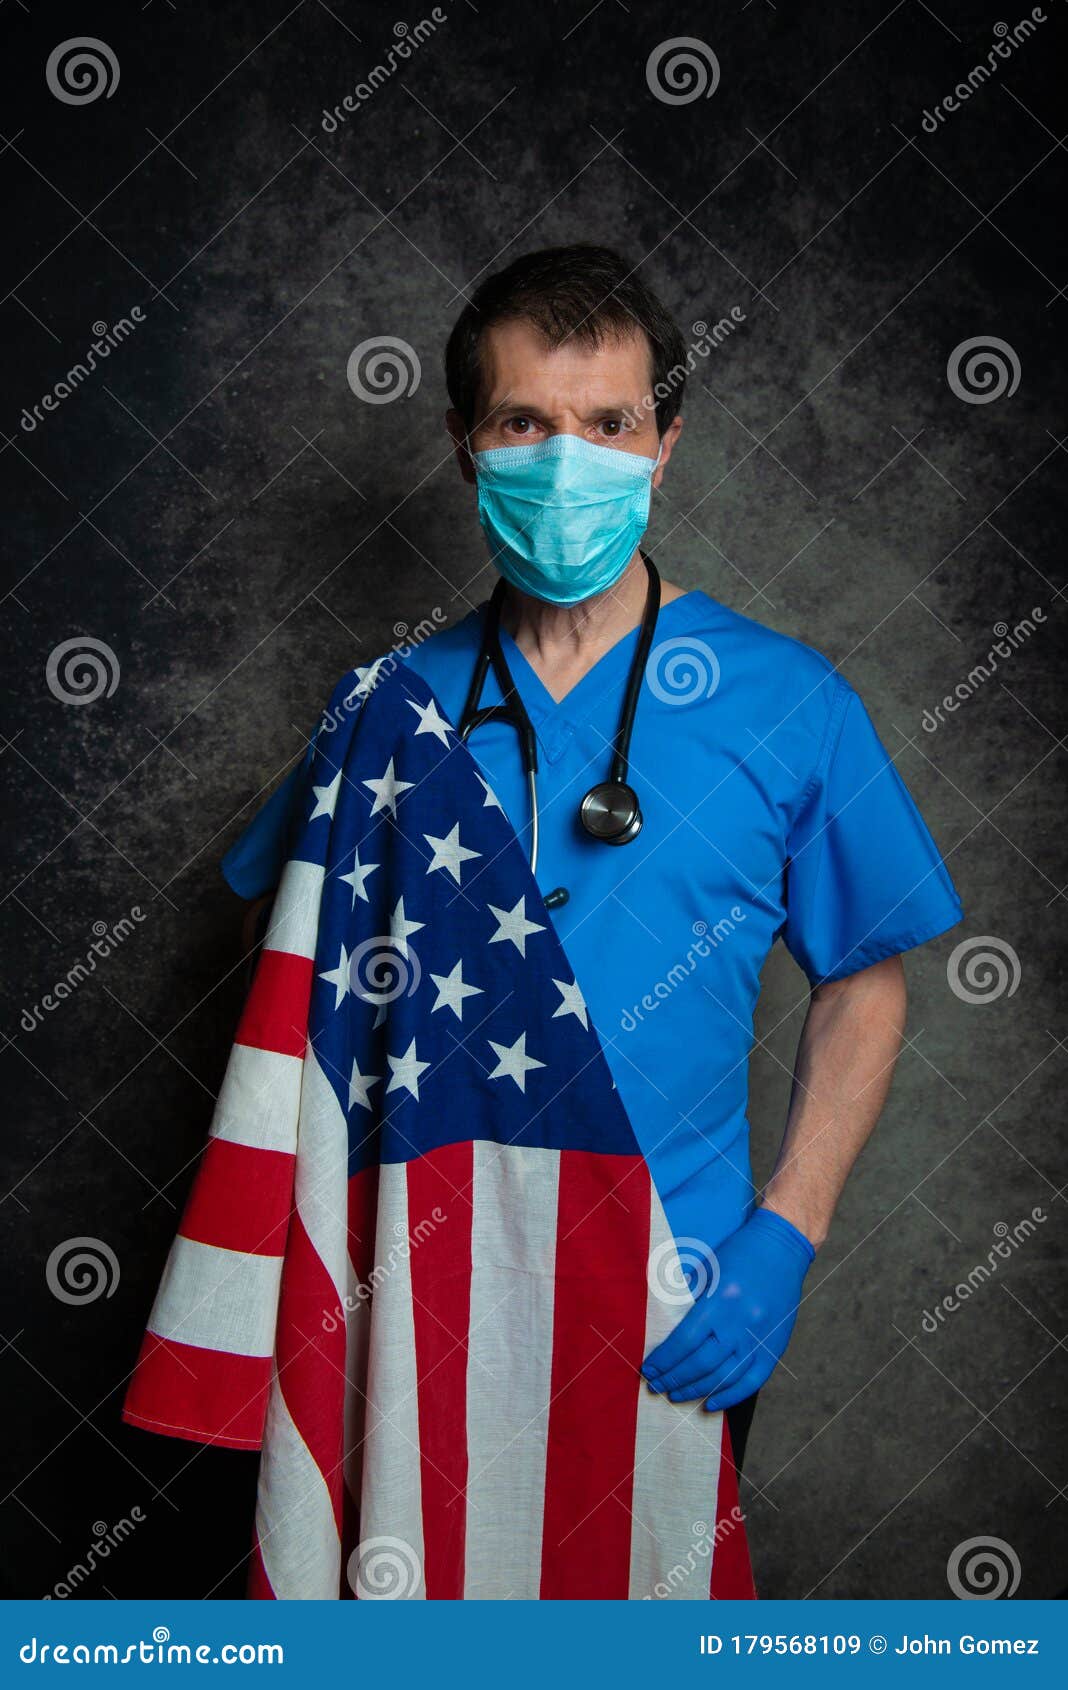 Doctor Wearing Surgical Mask Holding the American Flag. Stock Image ...